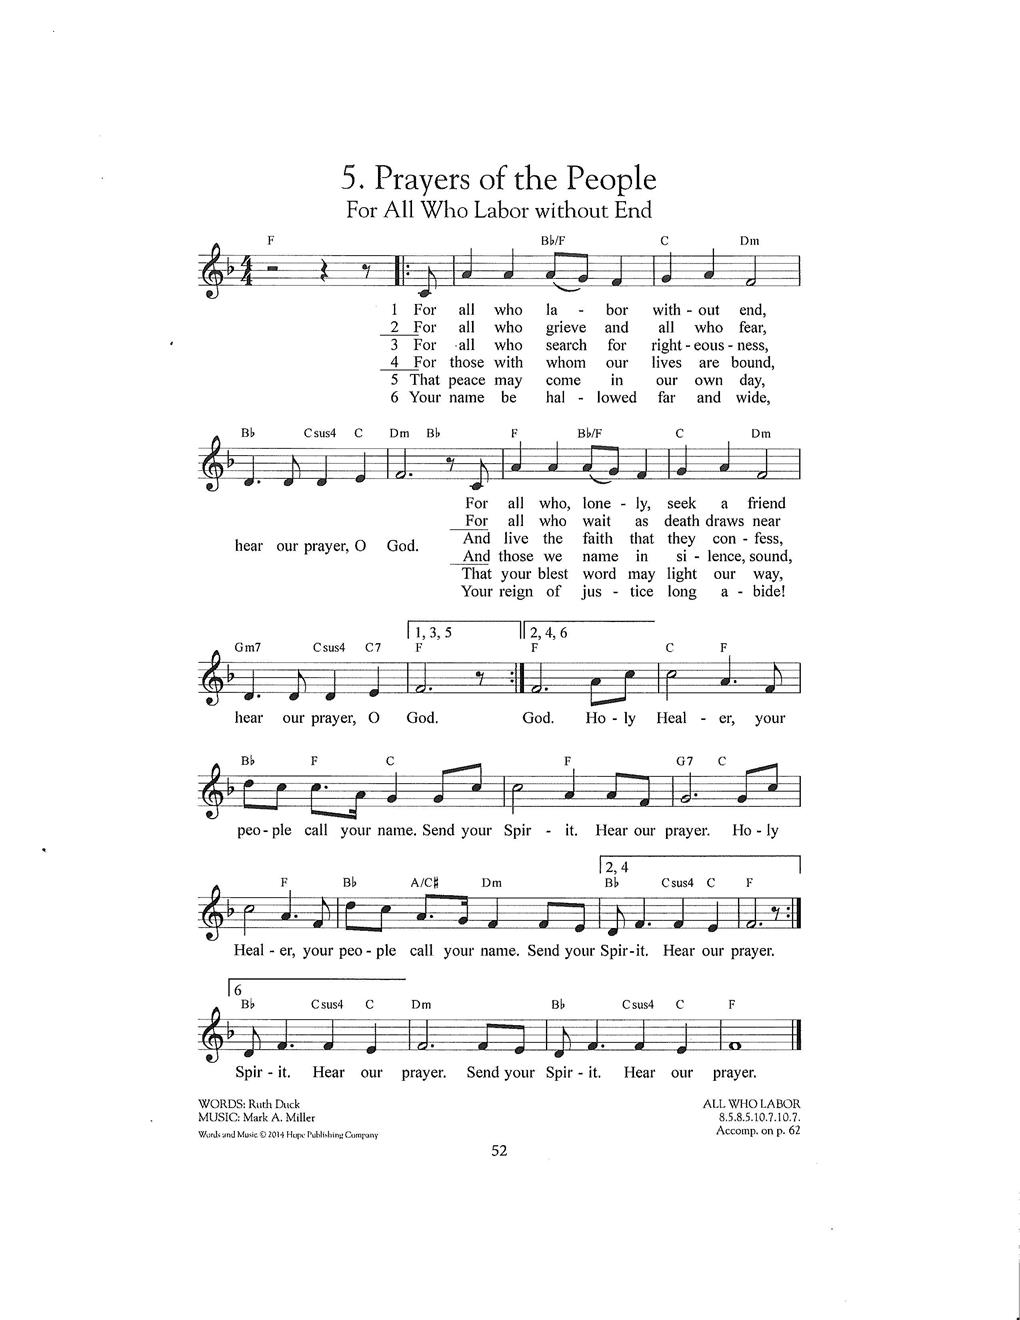 Table Prayer 5 - Prayers of the People (For All Who Labor without End) Cover Image